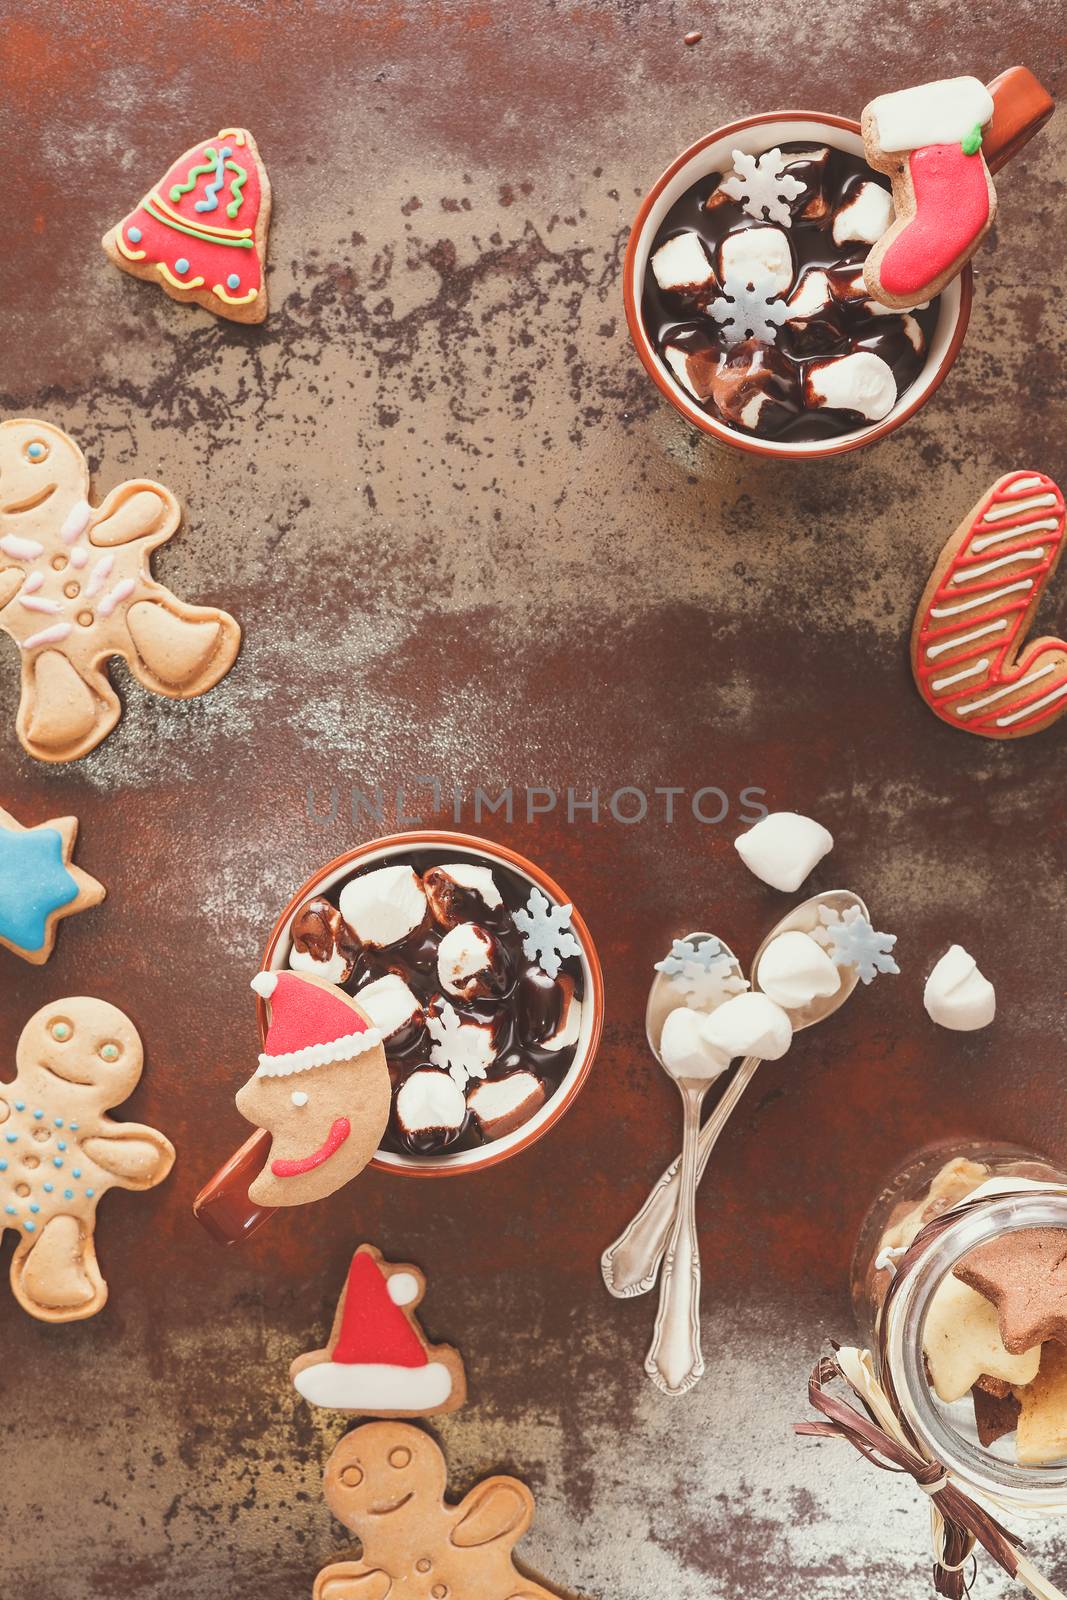 Hot chocolate and gingerbread cookies by Slast20